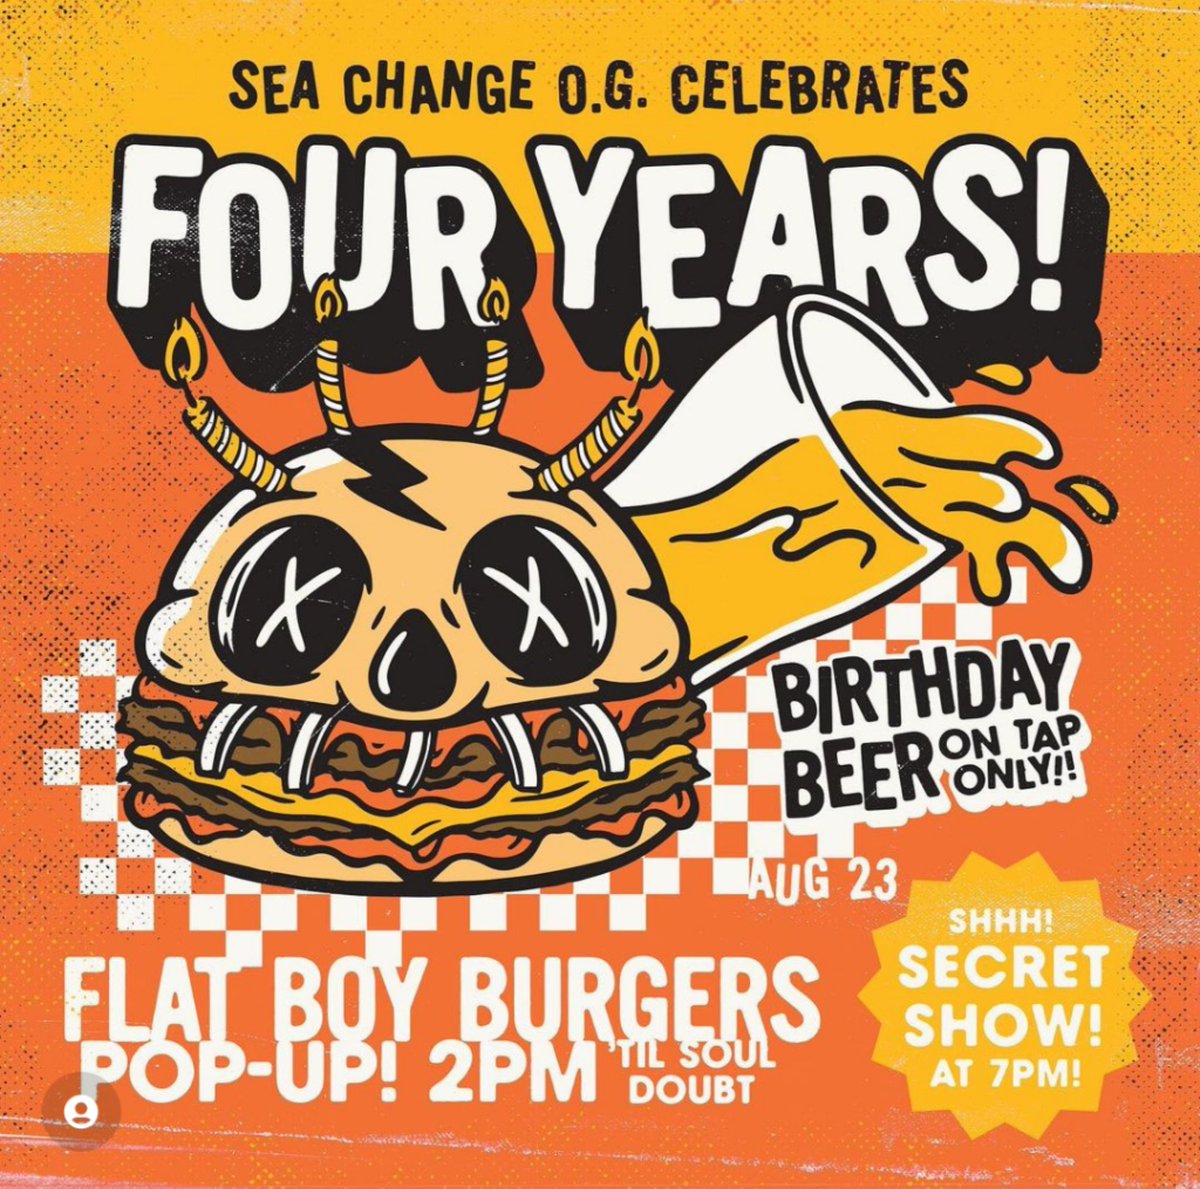 It's out 4th bday today at the OG taproom! 🎉 Grab a Flat Boy Burg & wash it down with an 'Blooty Call' beer (blueberry & creamy Earl Grey tea on an American wheat beer base) (Secret show at 7pm🤫)